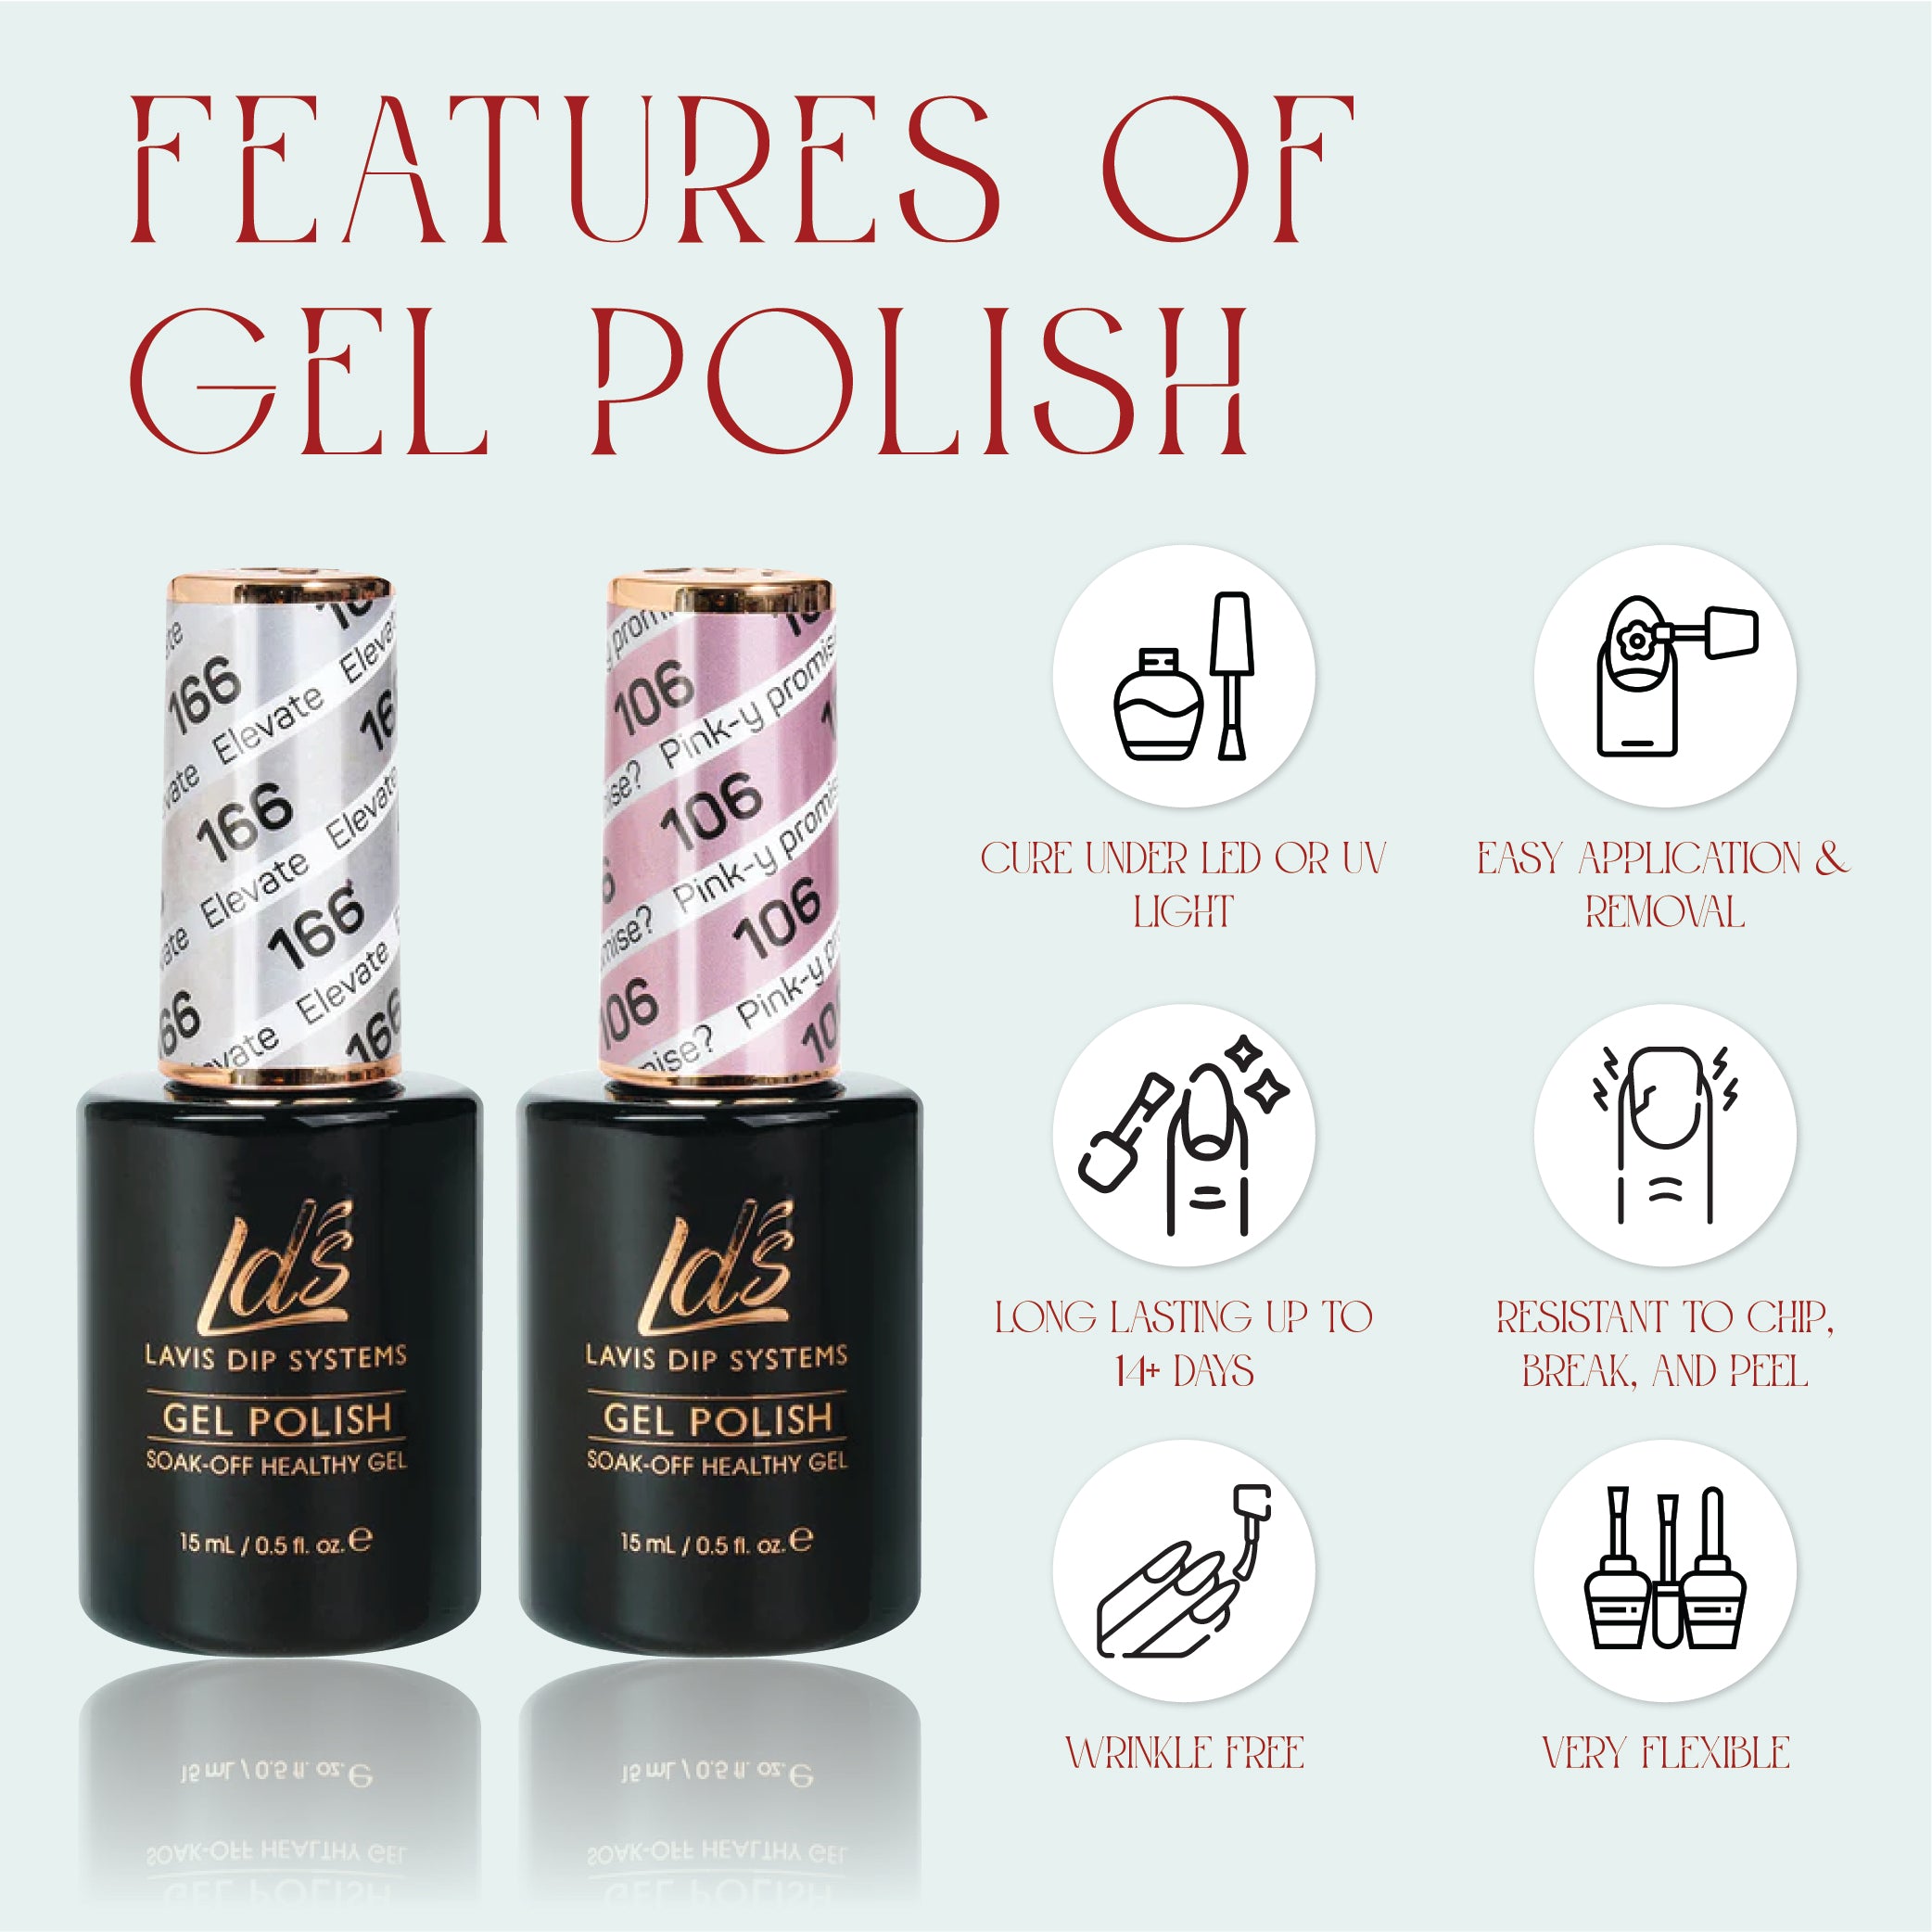 LDS 081 Hot Chocolate - LDS Healthy Gel Polish & Matching Nail Lacquer Duo Set - 0.5oz